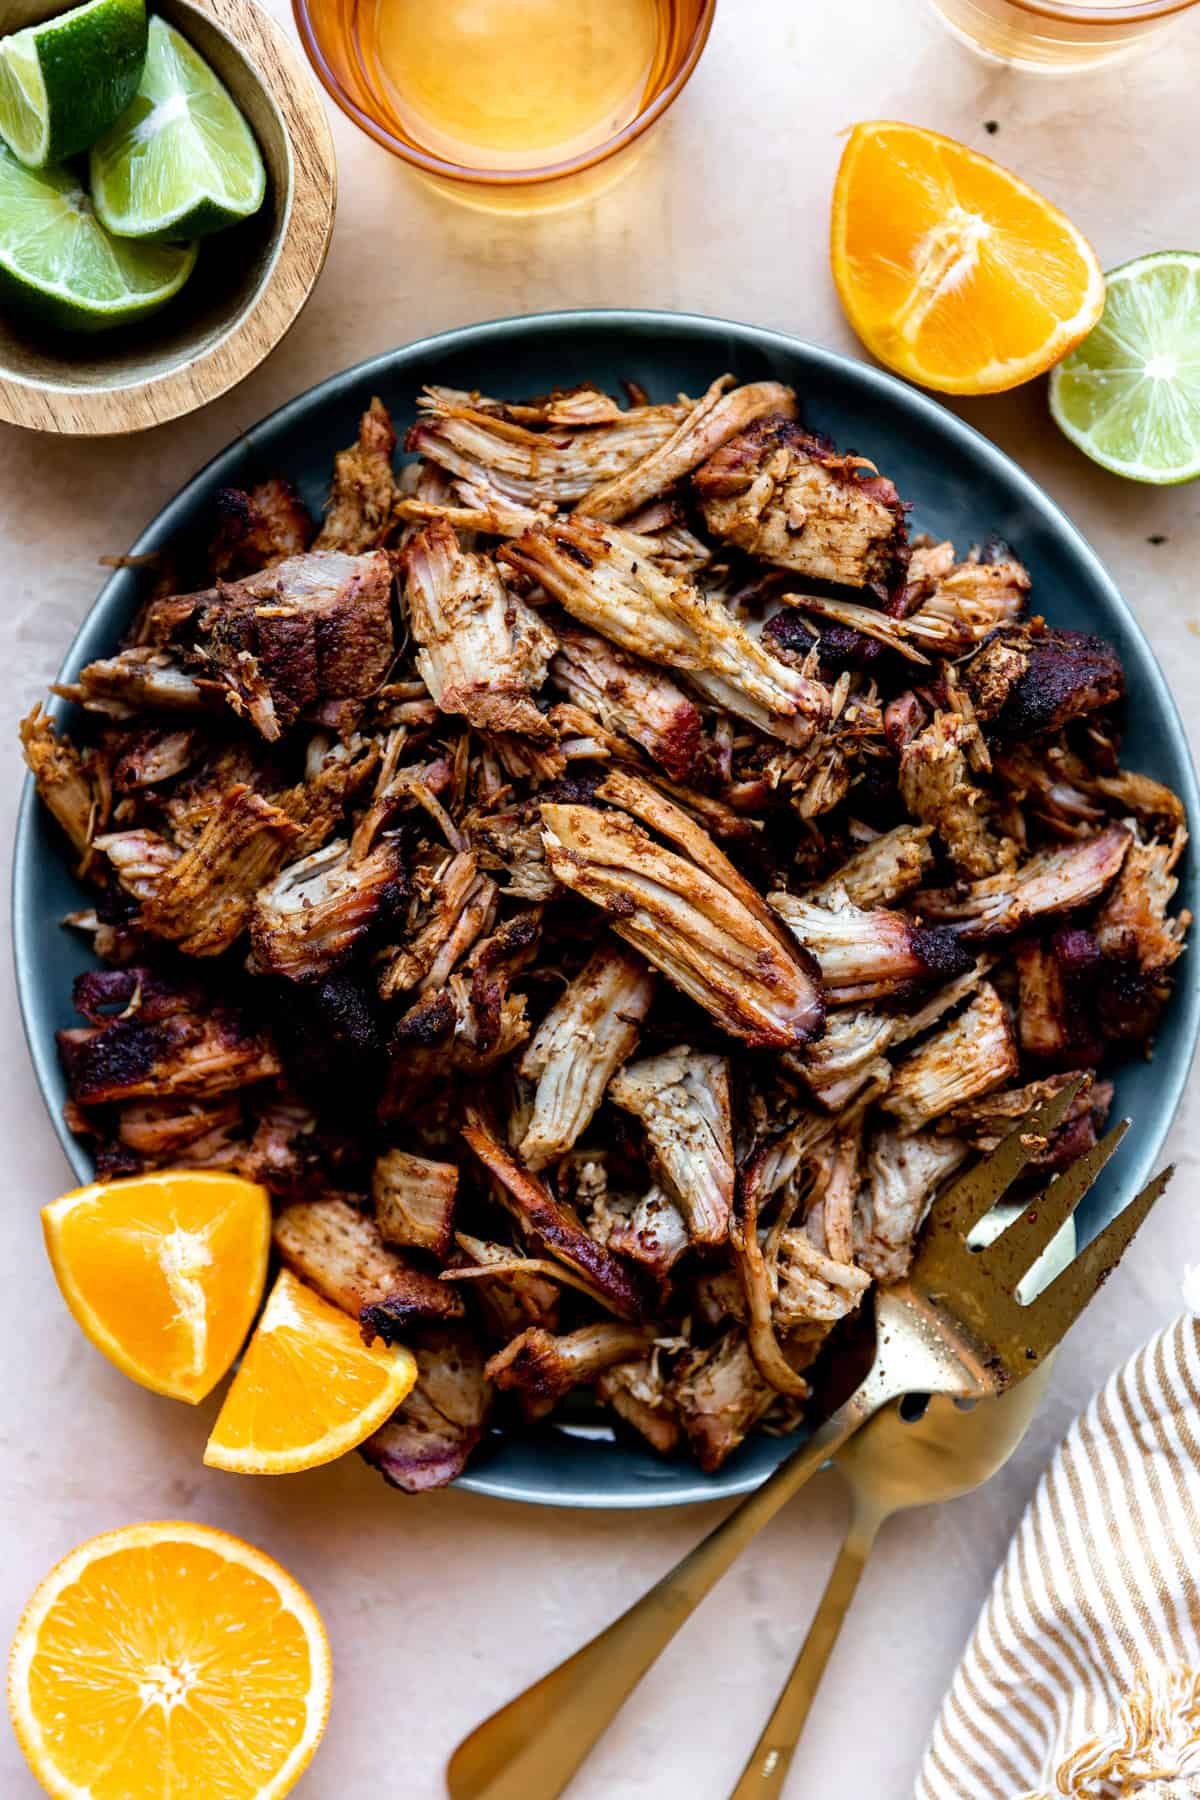 Bowl filled with crispy smoked carnitas meat with orange wedges and lime wedges on the side.